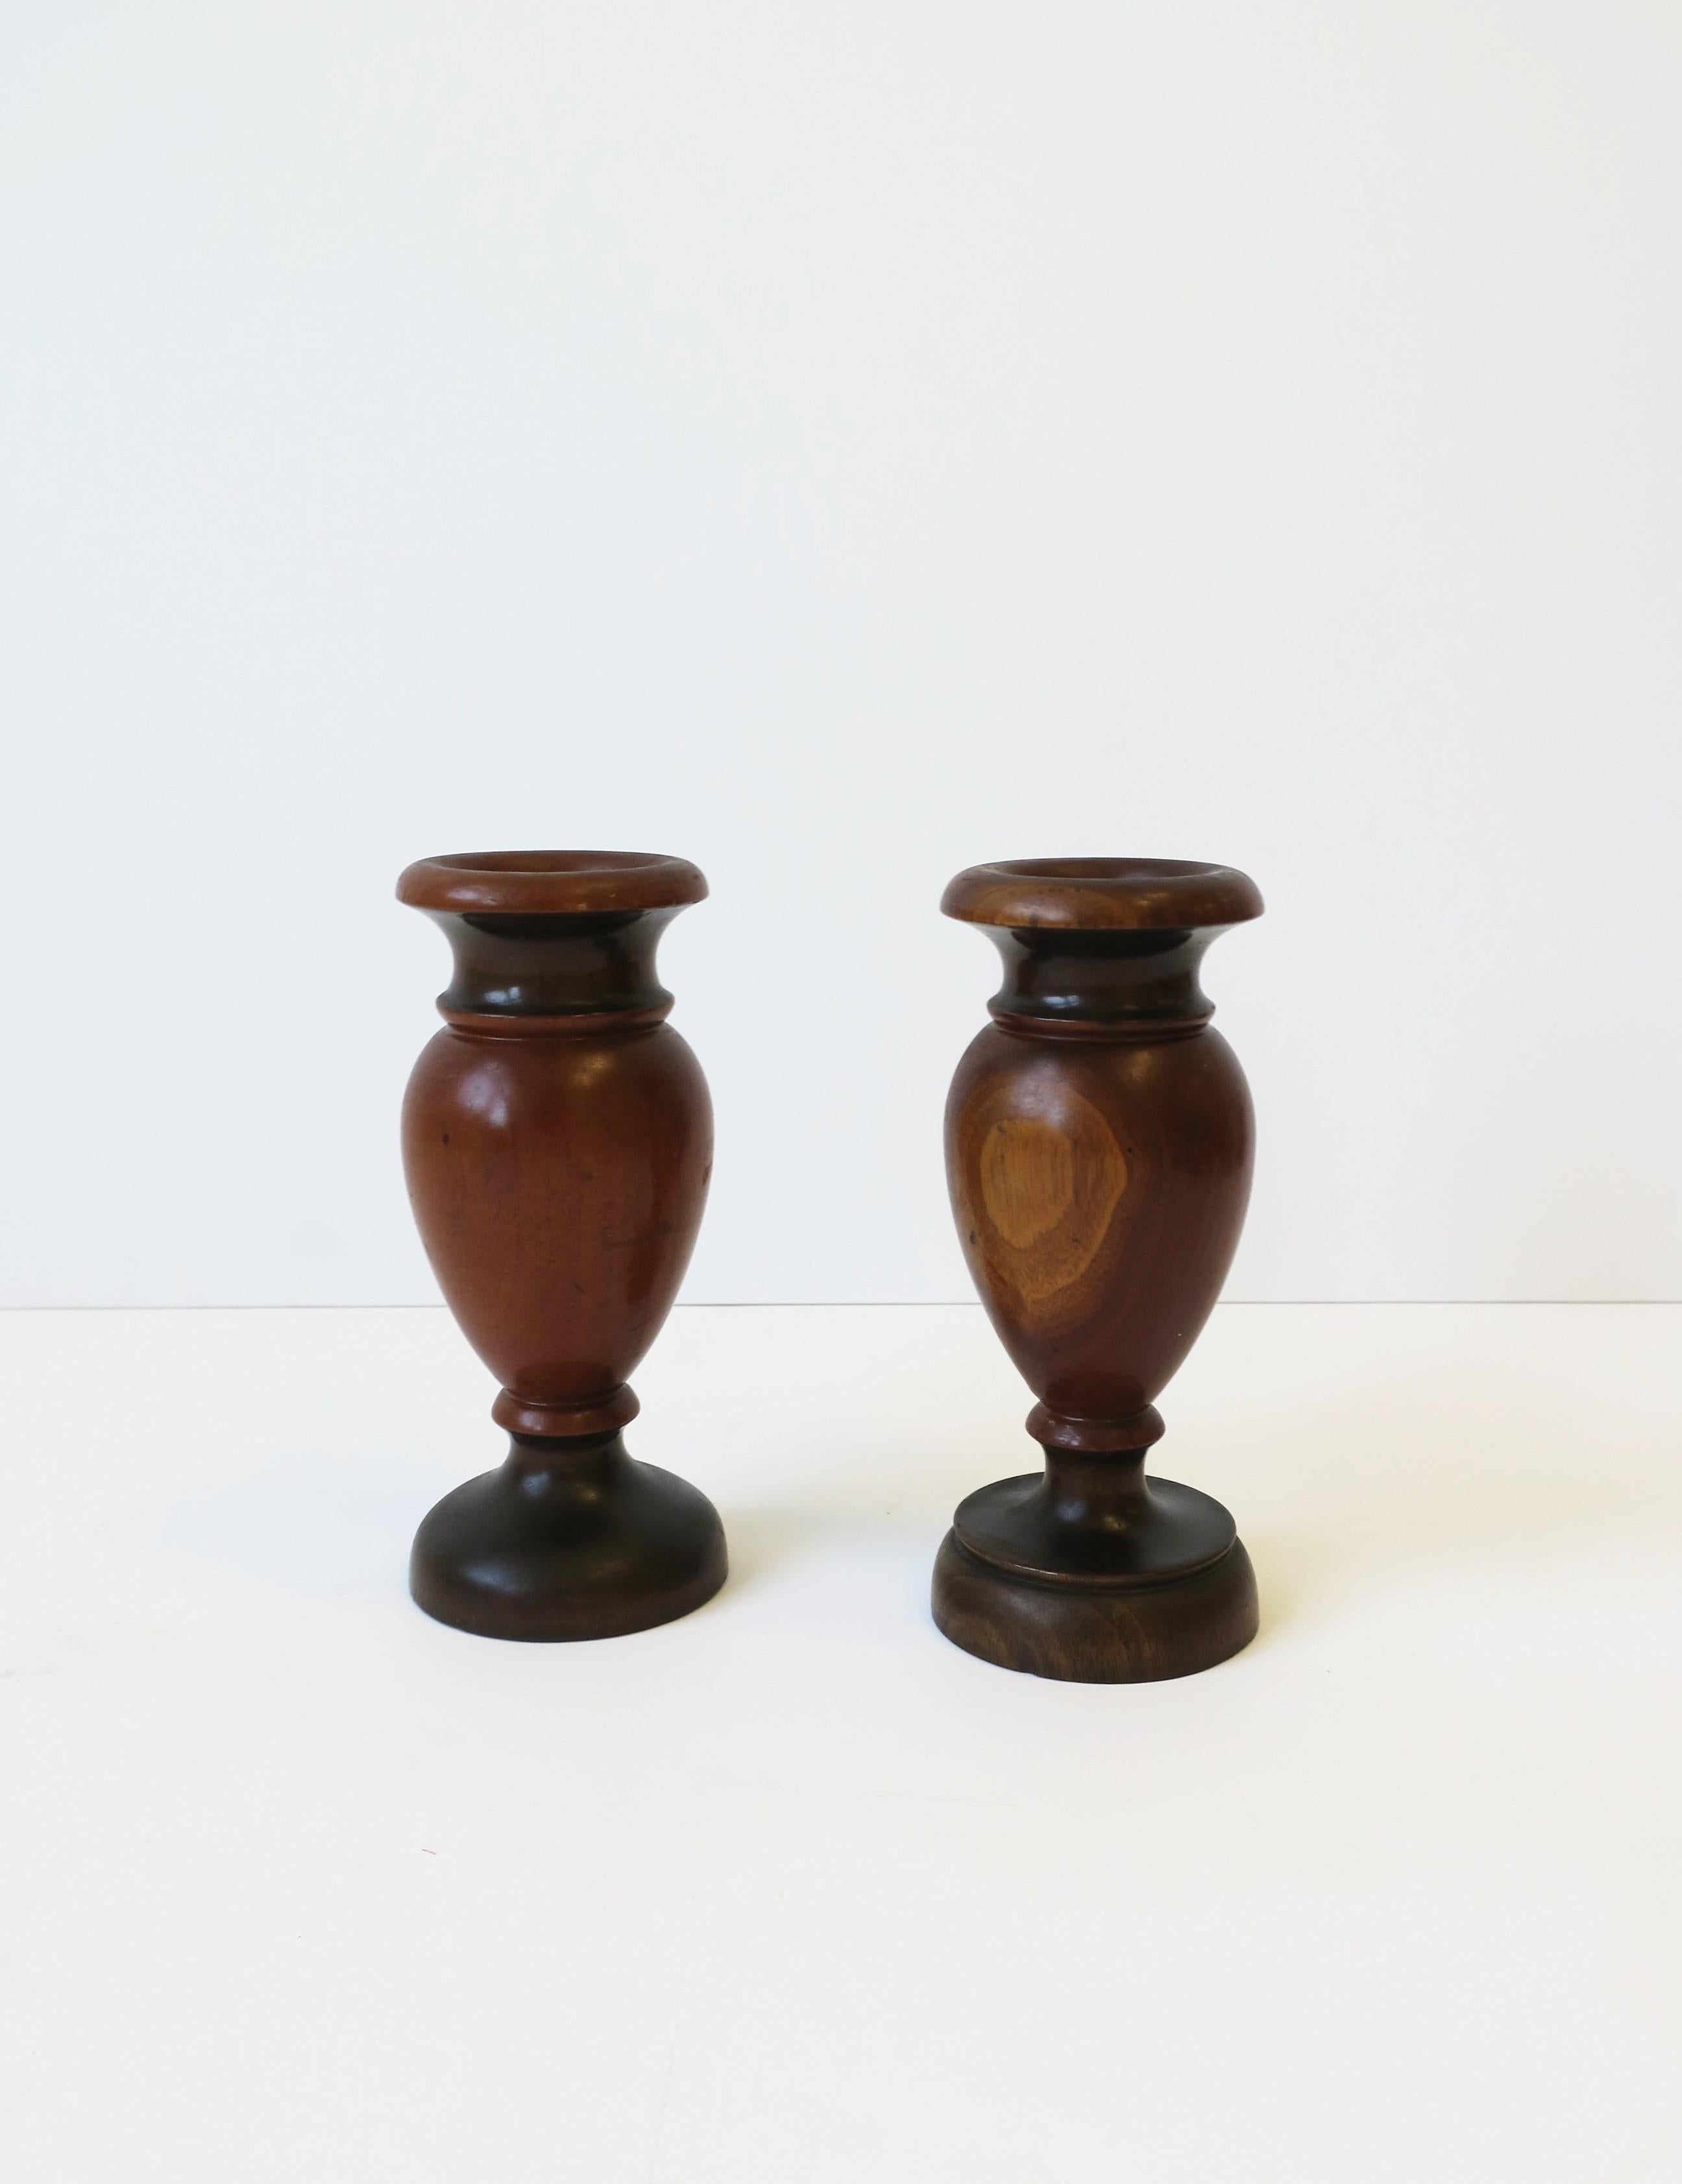 English Turned Walnut Urn Wood Spill Vases, Pair, circa 19th Century For Sale 5